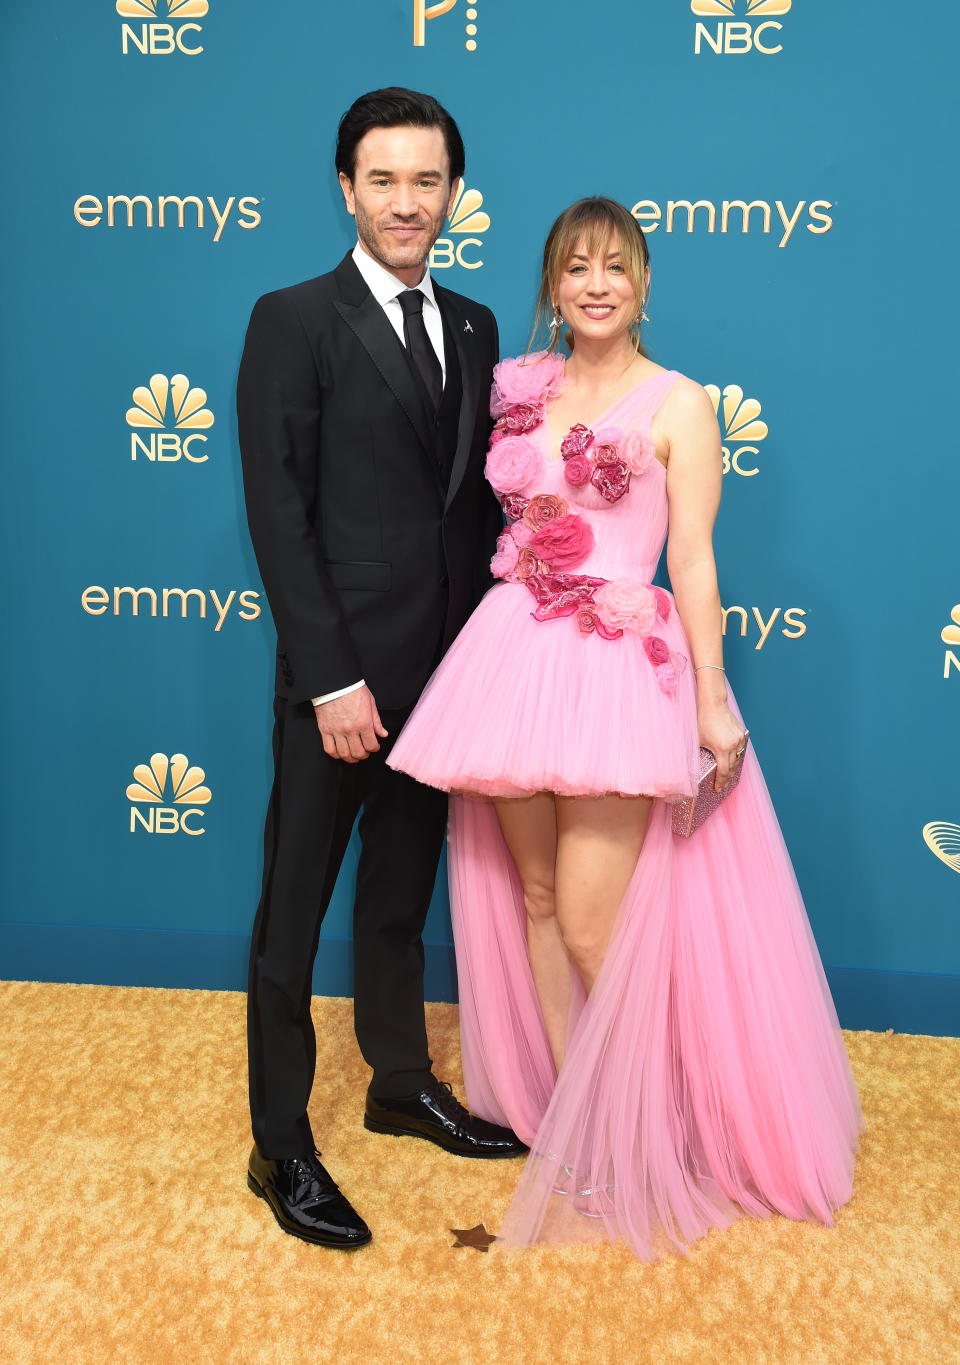 Tom Pelphrey and Kaley Cuoco at the 74th Primetime Emmy Awards held at Microsoft Theater on September 12, 2022 in Los Angeles, California. (Photo by Gilbert Flores/Variety via Getty Images)